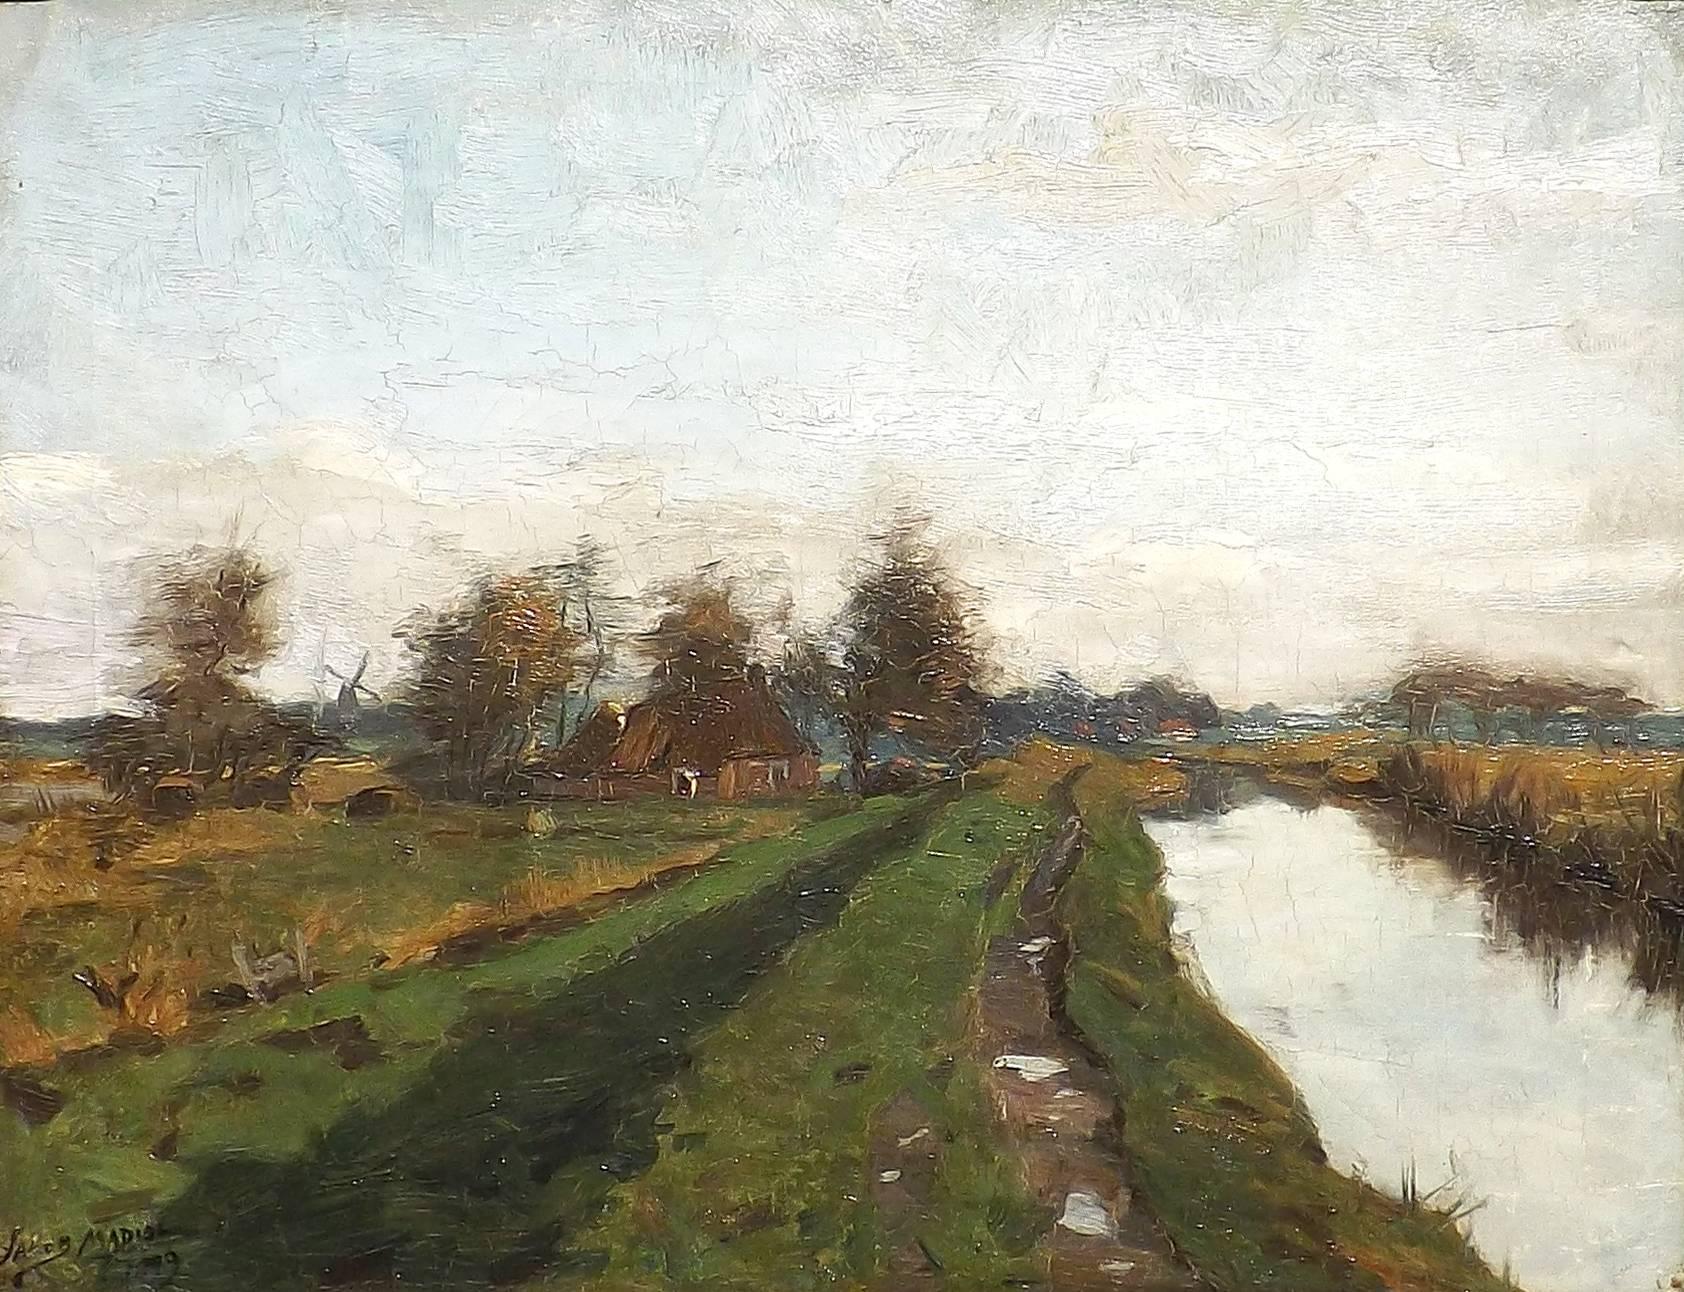 A lonely Dutch farm sits along a canal in the northern part of The Netherlands near the town of Paterswolde in this landscape painting by Jacob Madiol. Small puddles are a reminder of recent rainfall, the clearing sky reflected in the water. 

The